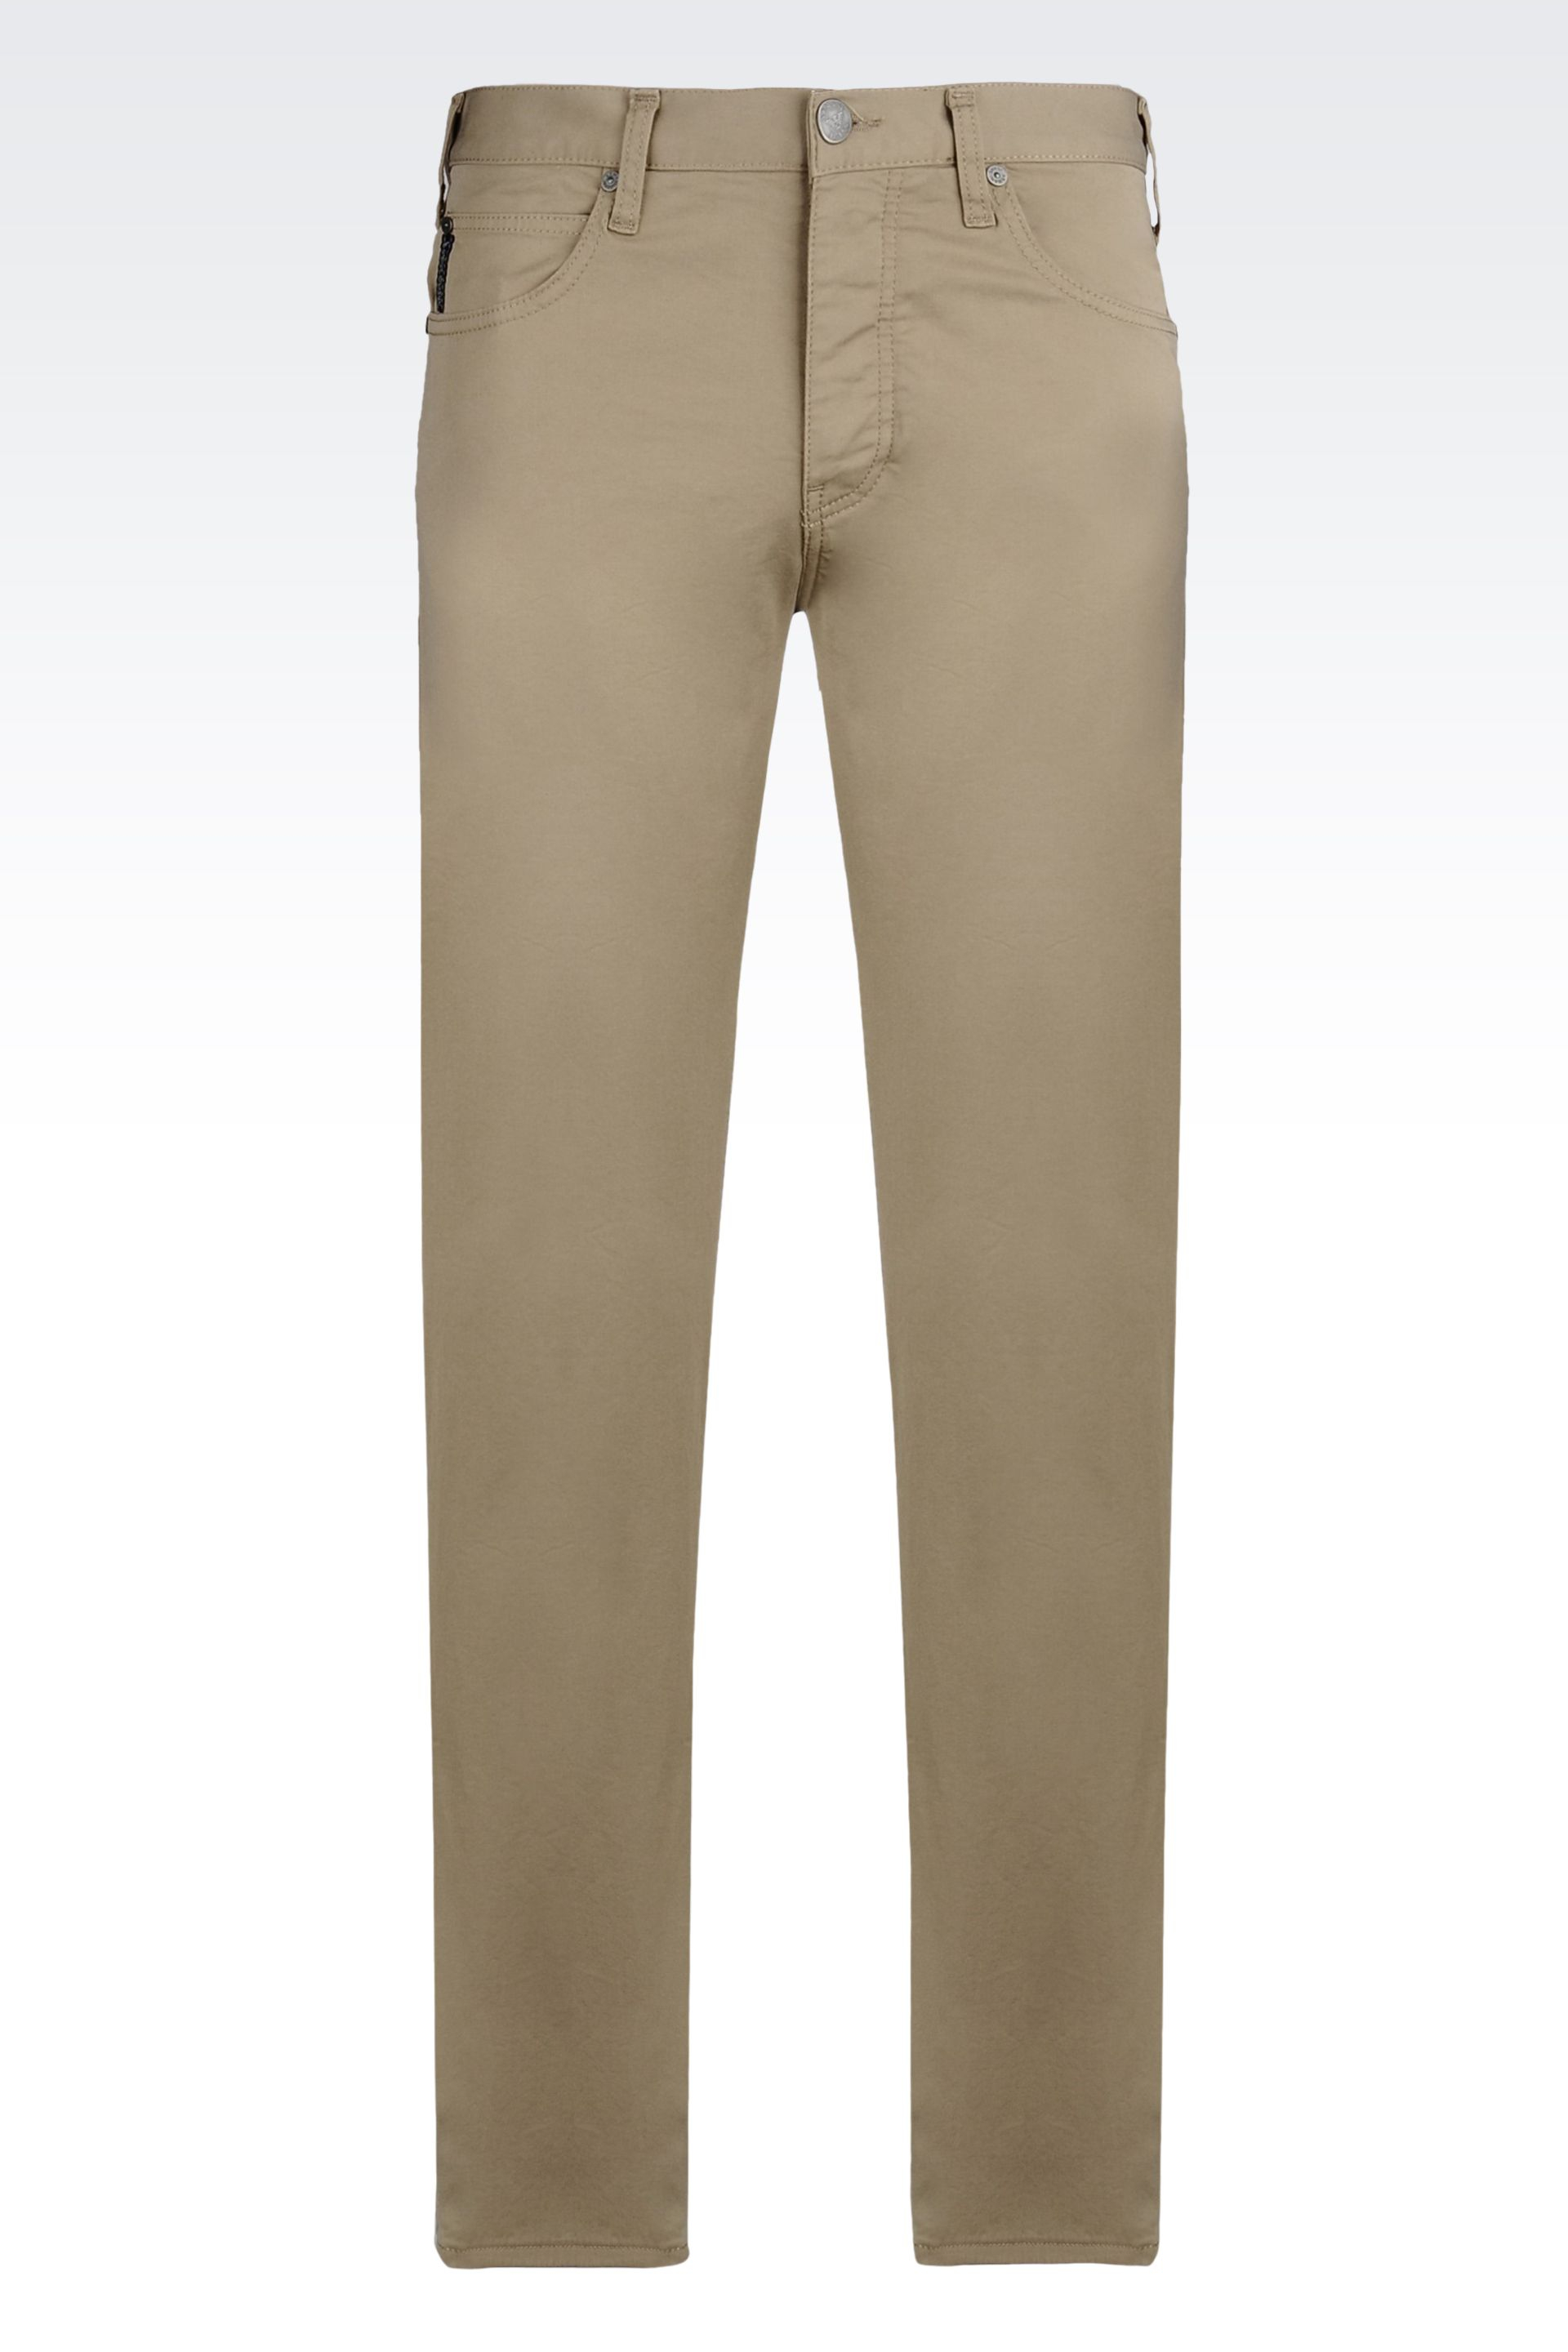 Armani Jeans 5-Pocket Trousers In Stretch Gabardine in Khaki (Natural) for  Men - Lyst